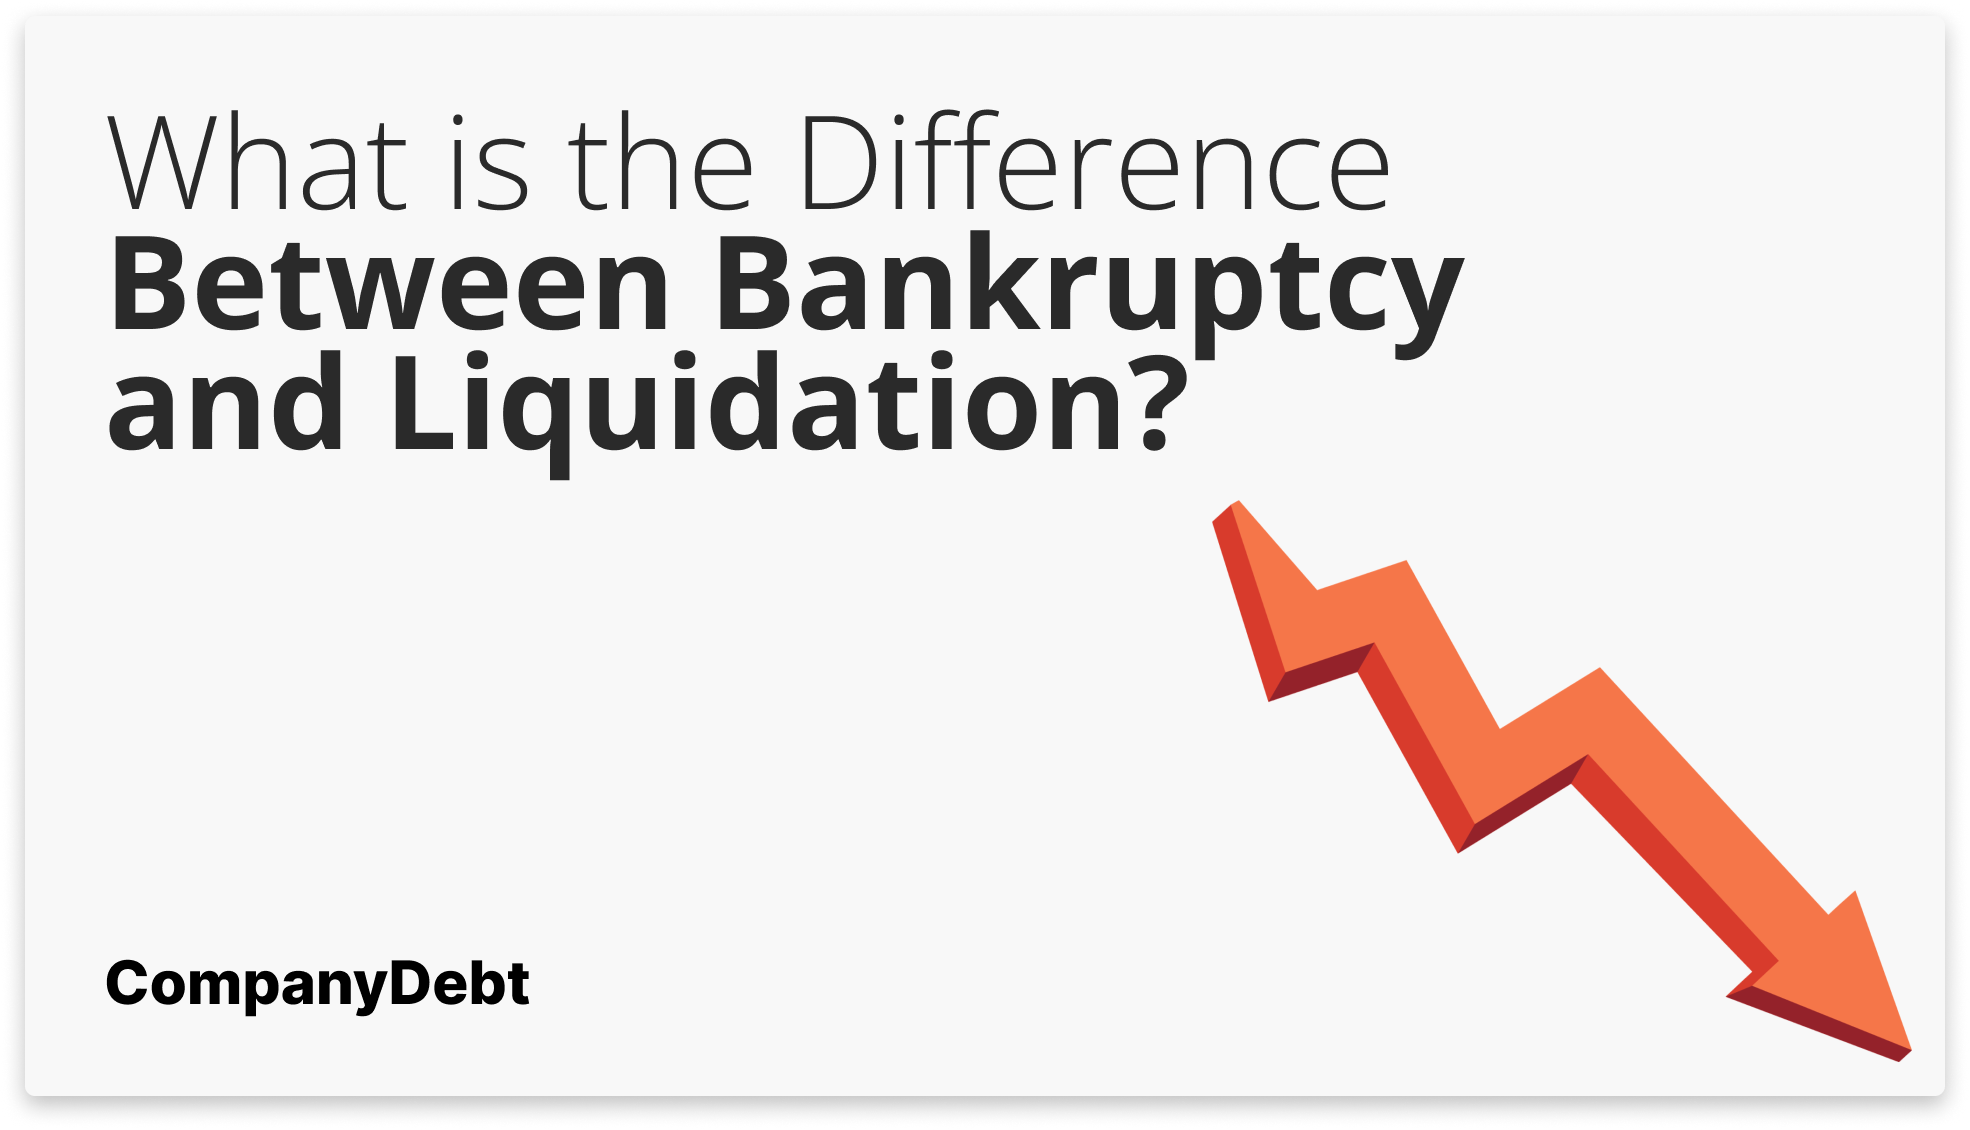 What is the Difference Between Bankruptcy and Liquidation?